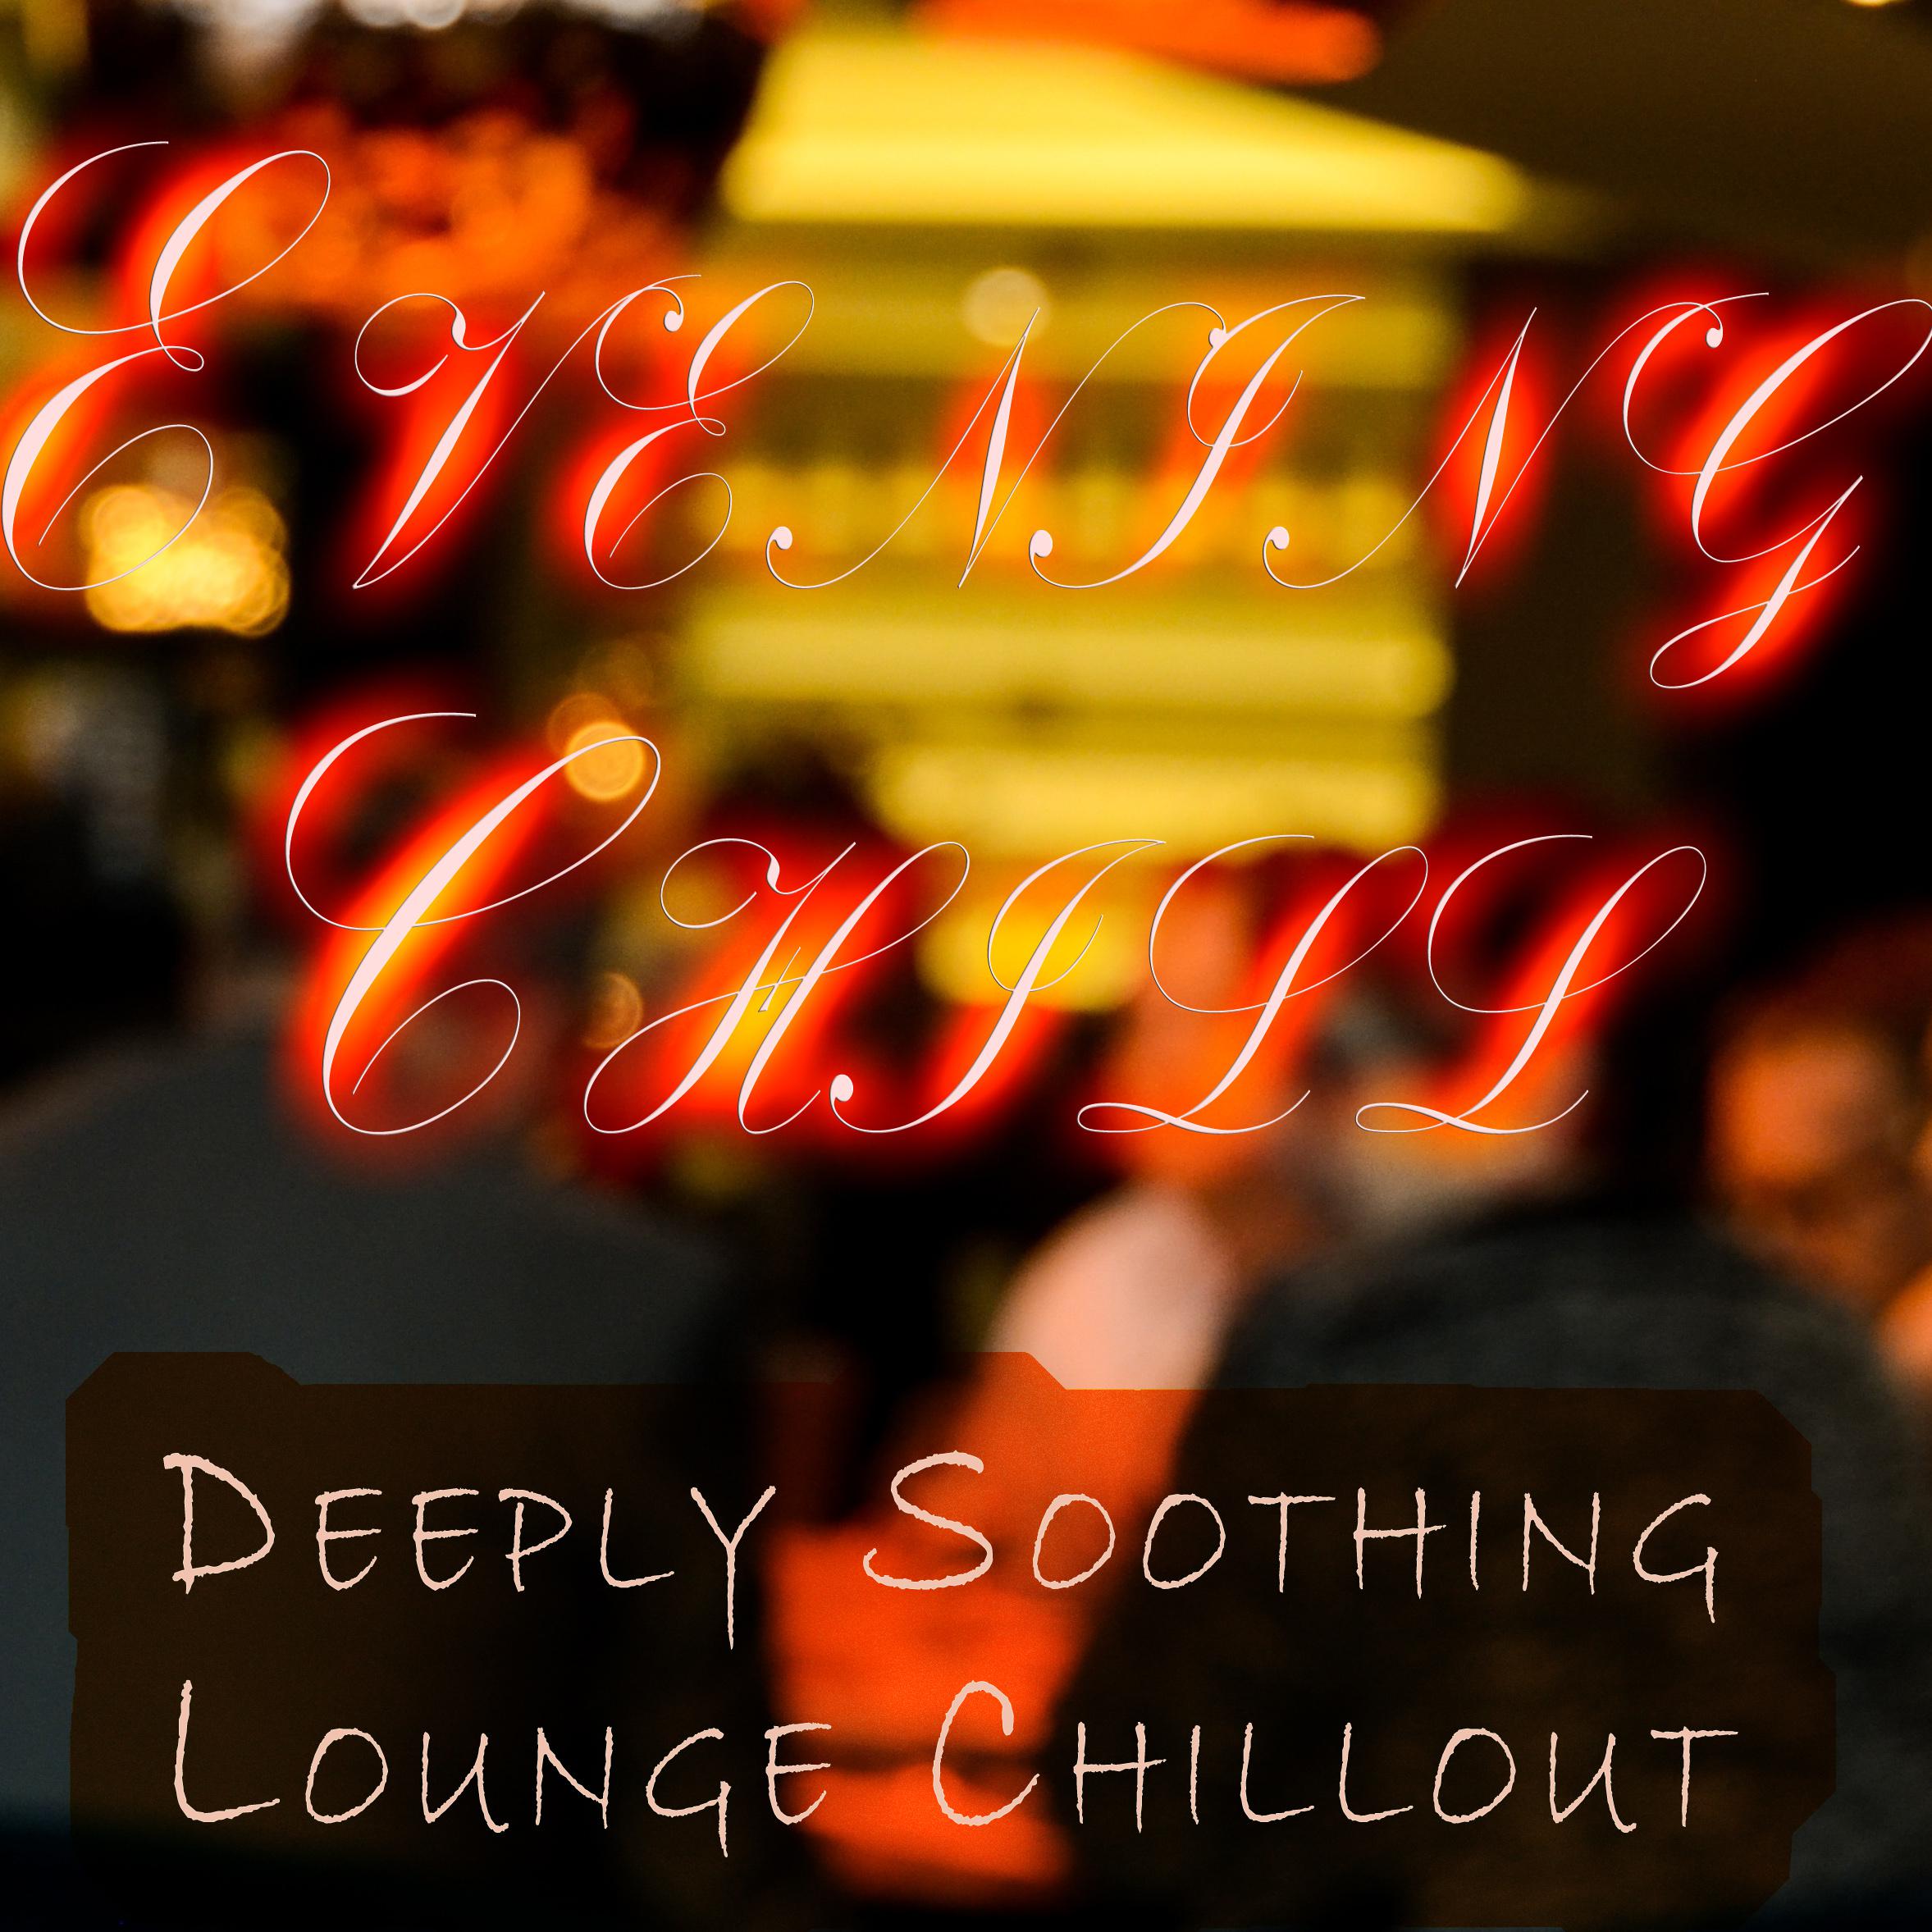 Evening Chill - 20 Deeply Soothing Lounge Chillout Tracks to De-Stress, Unwind and Relax, and for a Completely Chill Ambience, Zen Spa & Meditation Sessions, Total Study Focus and a Good Mood